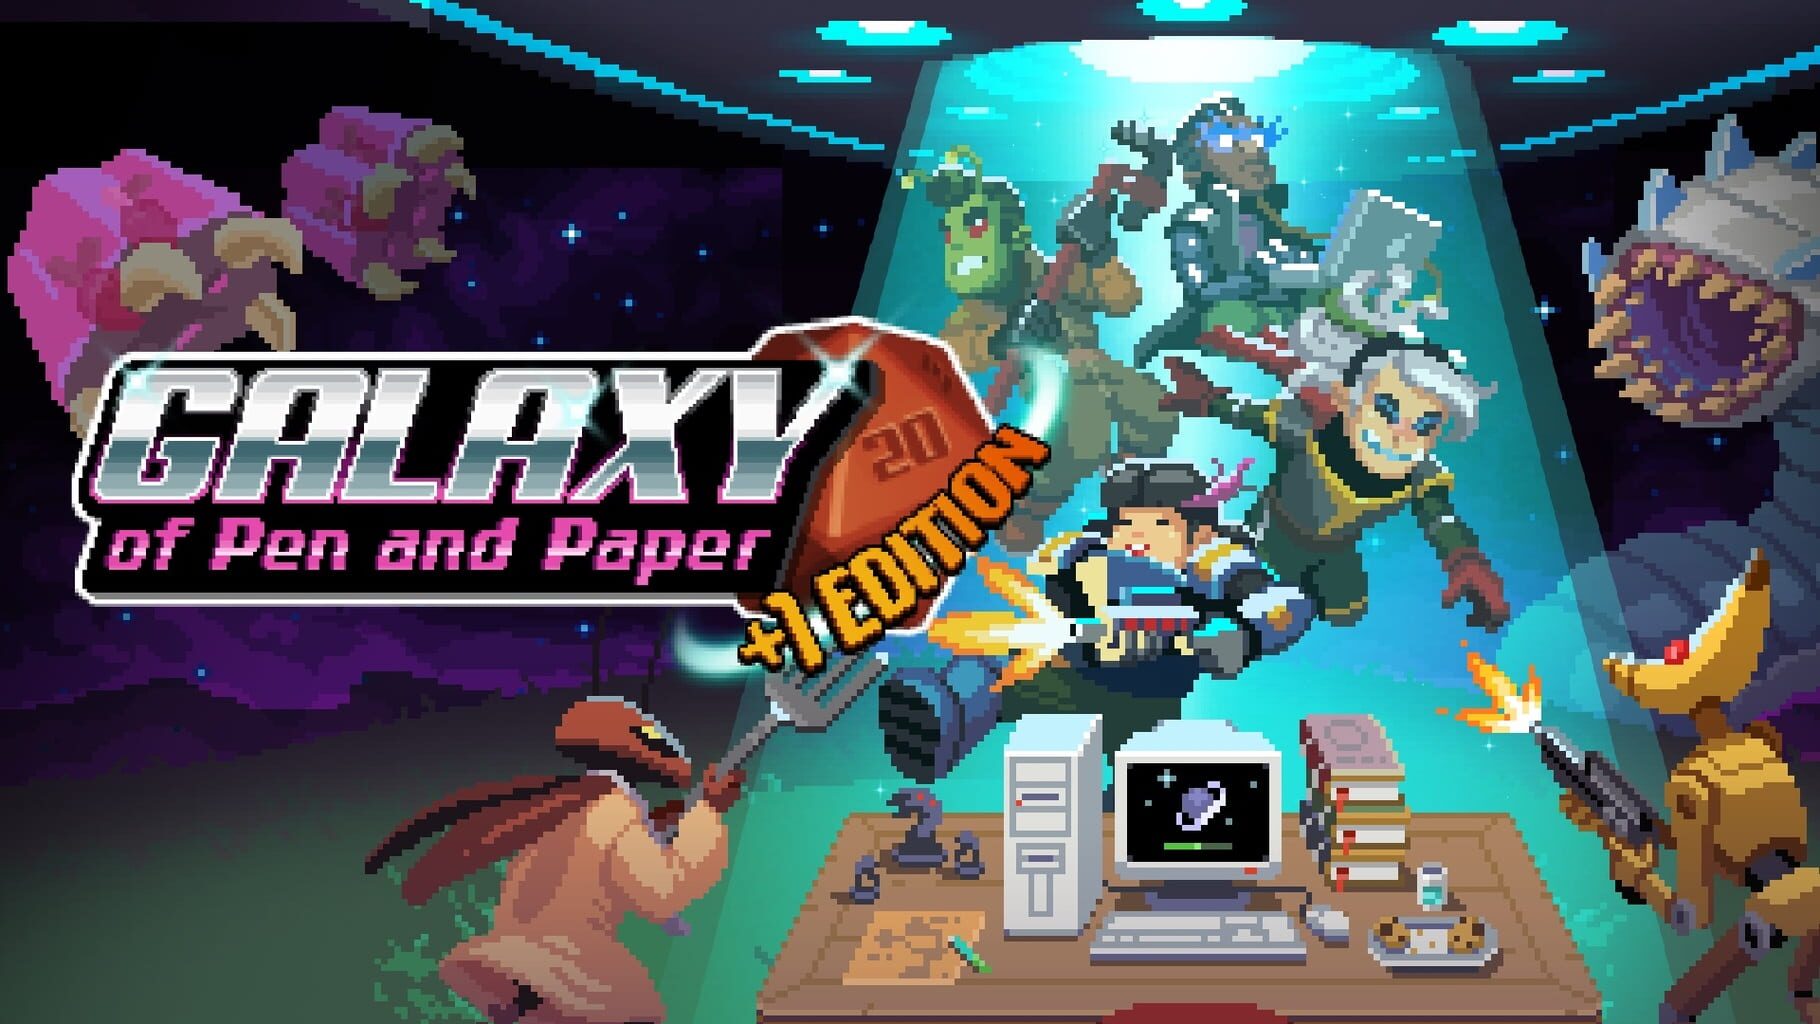 Galaxy of Pen and Paper +1 Edition artwork